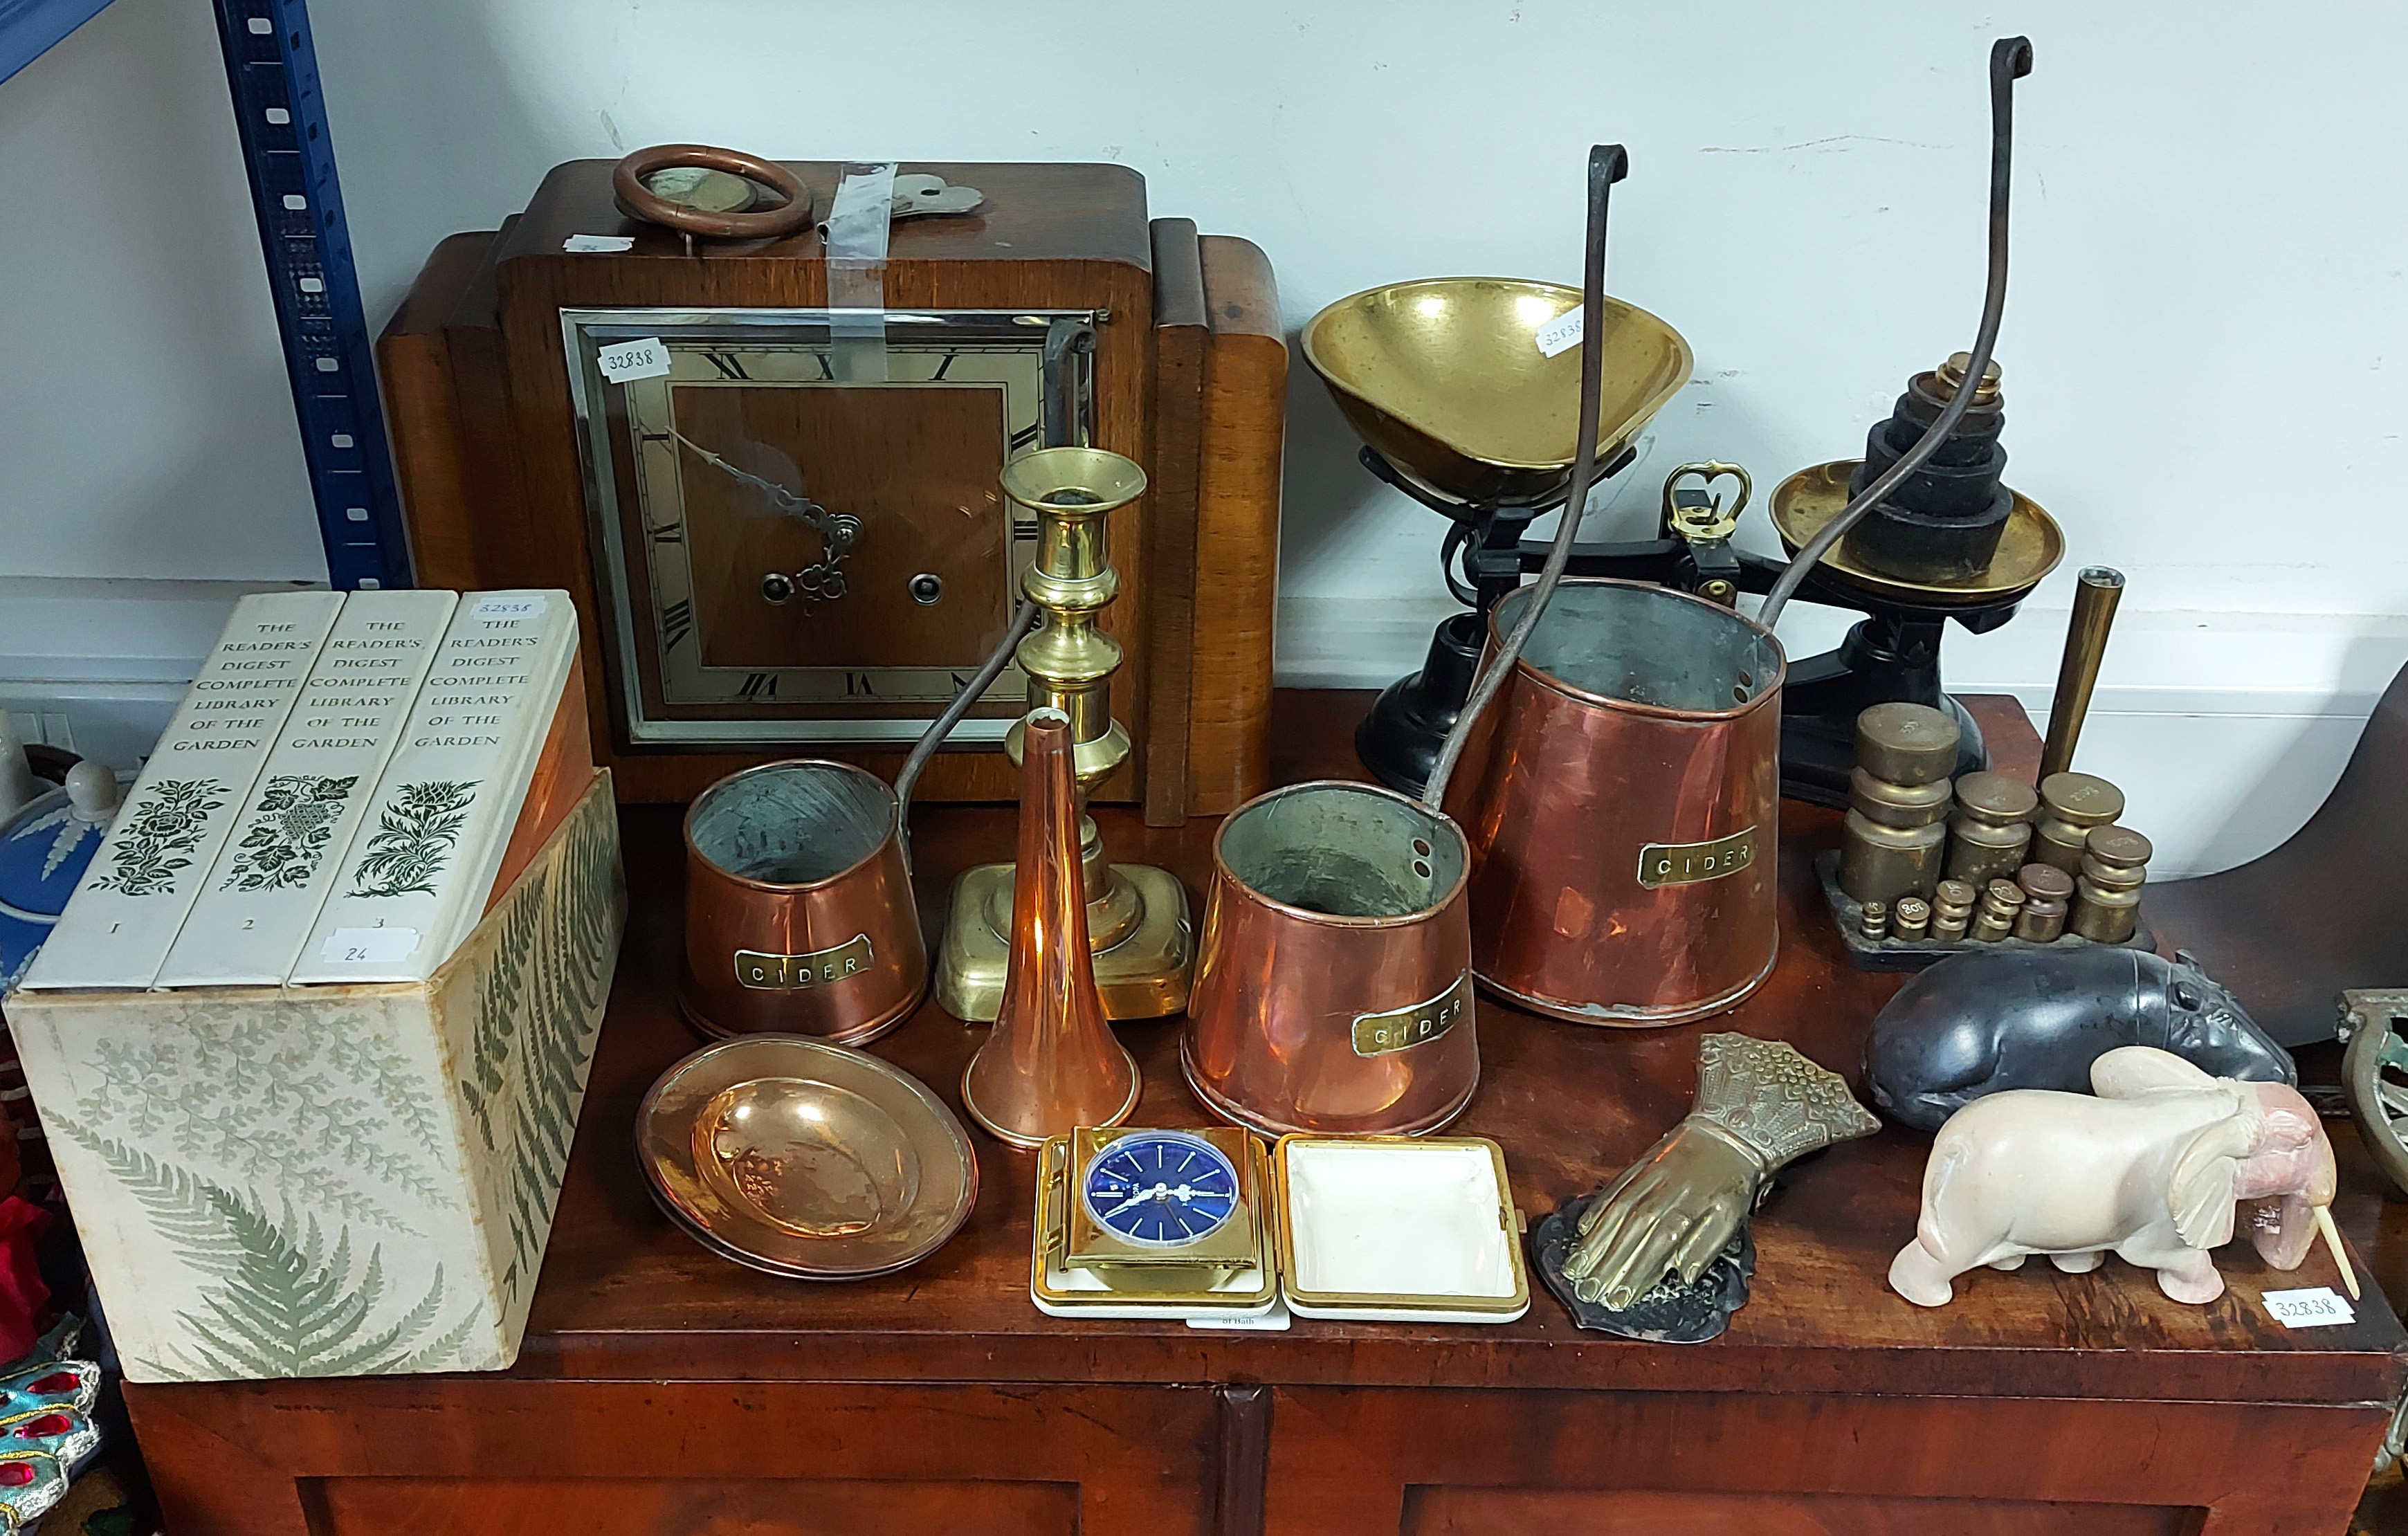 Two mid-20th century oak-cased mantel clocks, two 19th century trinket boxes, various items of